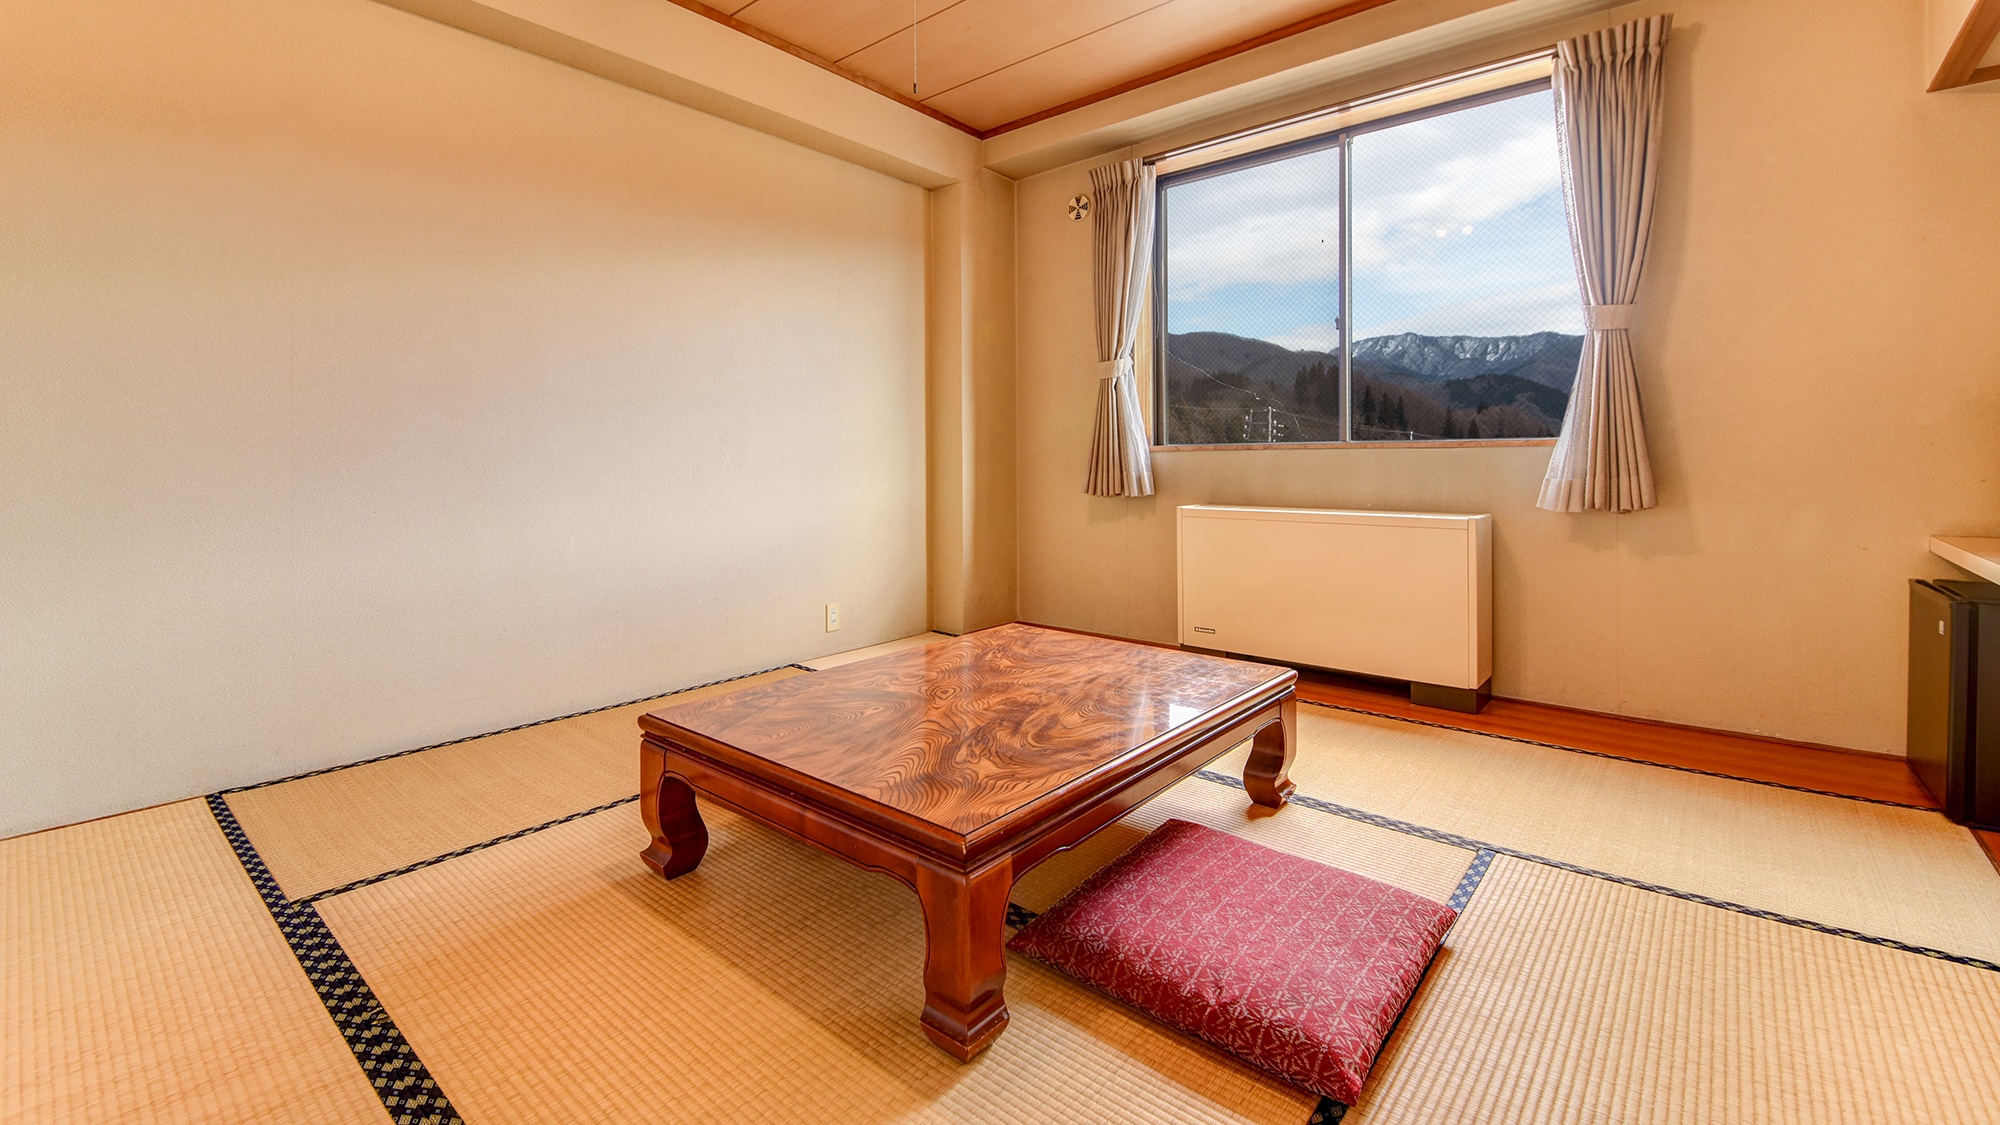 * Japanese-style room in the main building / A tatami room where you can stretch your legs and relax. It is also recommended for families with small children.